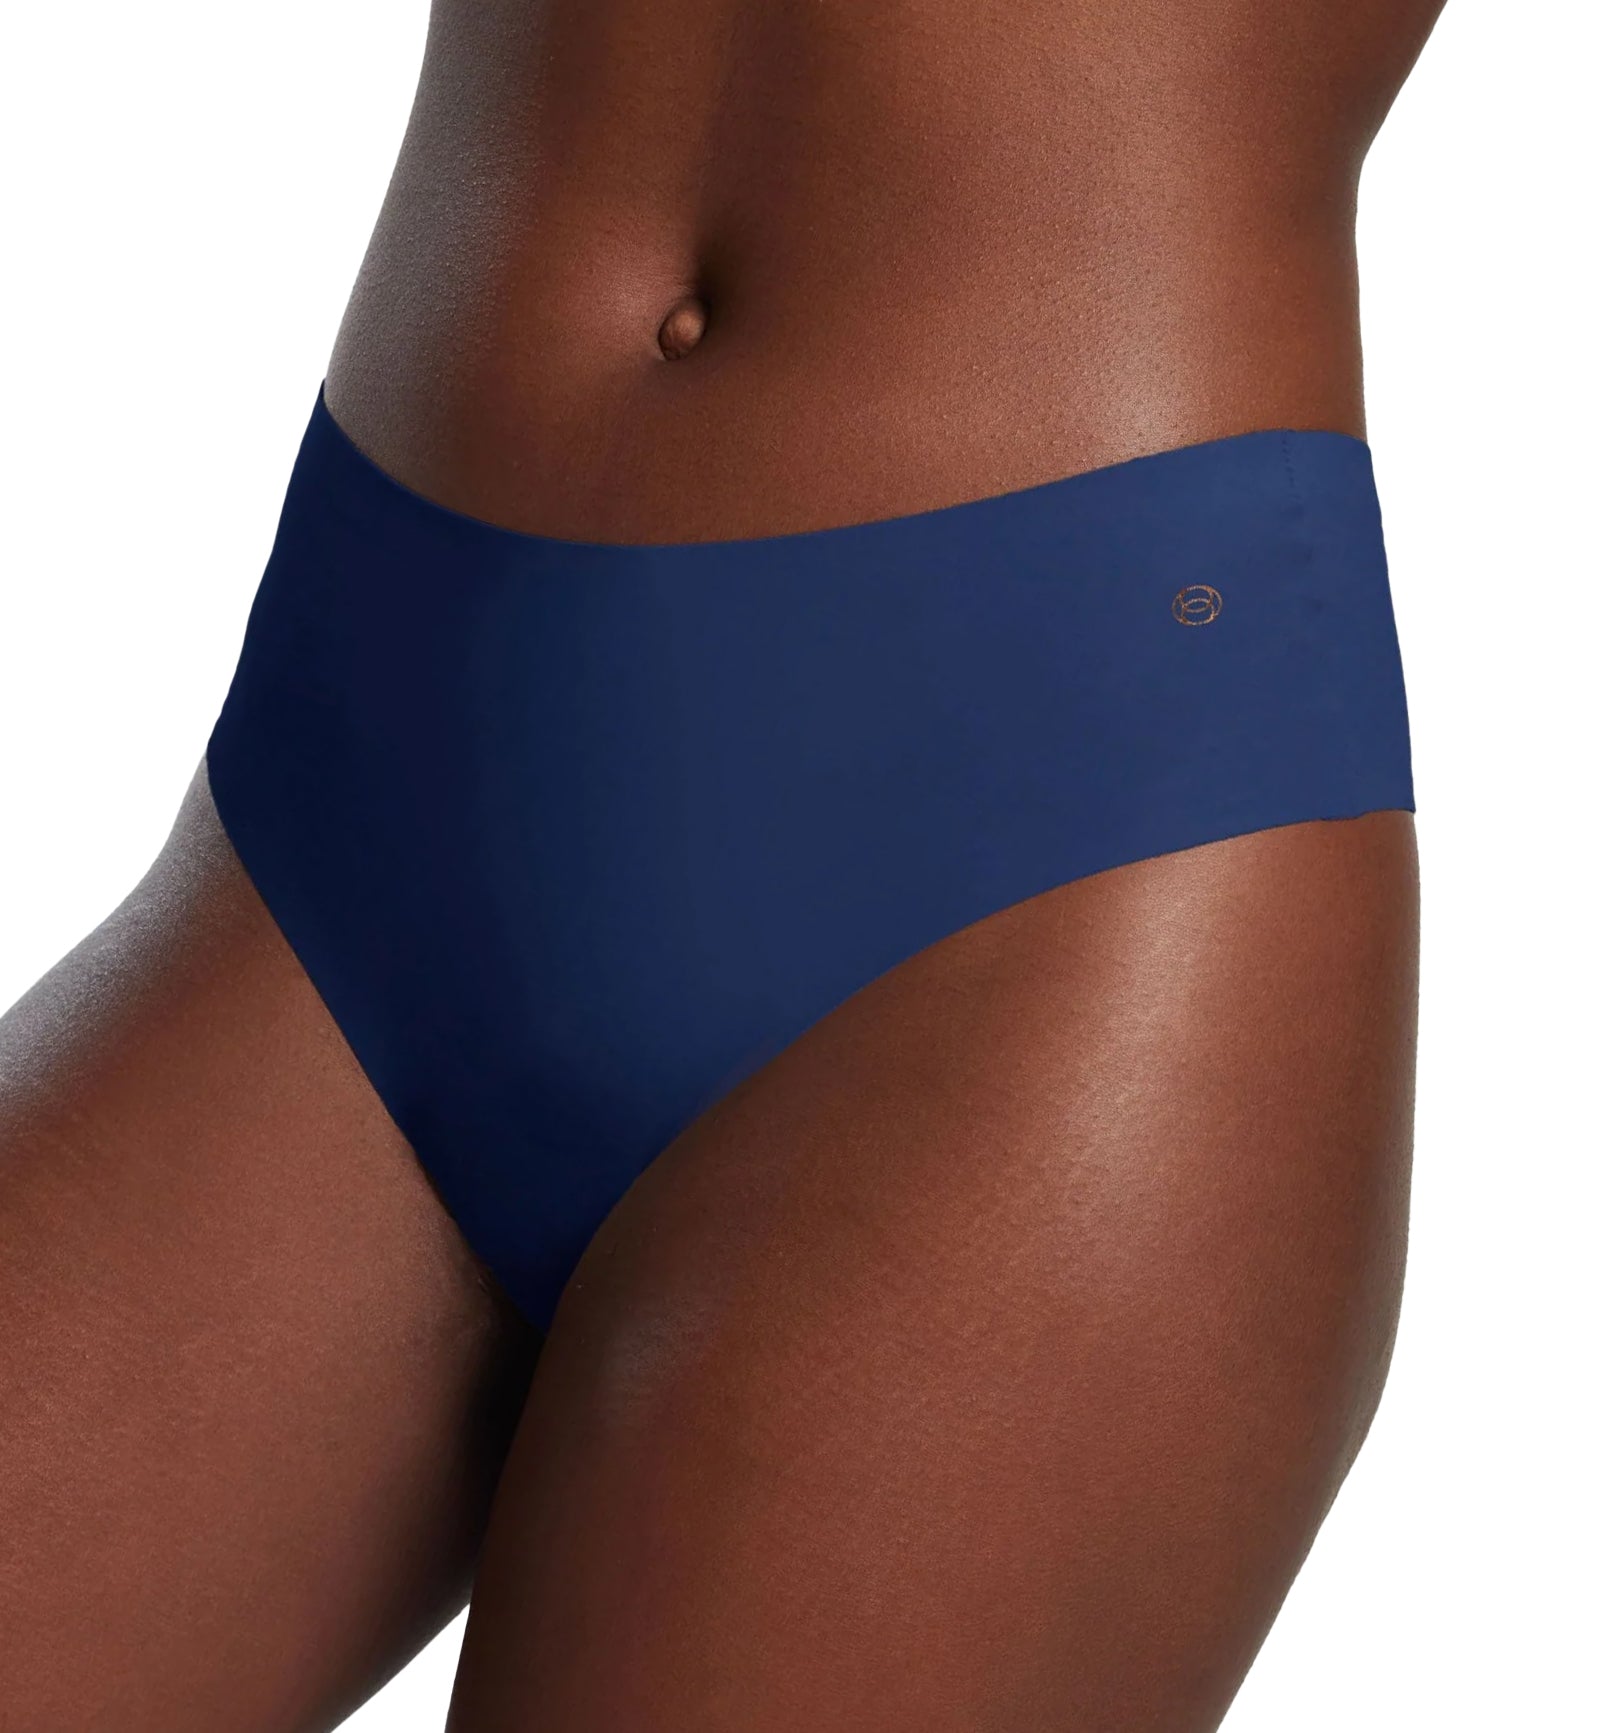 Evelyn & Bobbie High-Waisted Thong (1703/1709),US 0-14,Midnight Navy - Midnight Navy,US 0 - 14